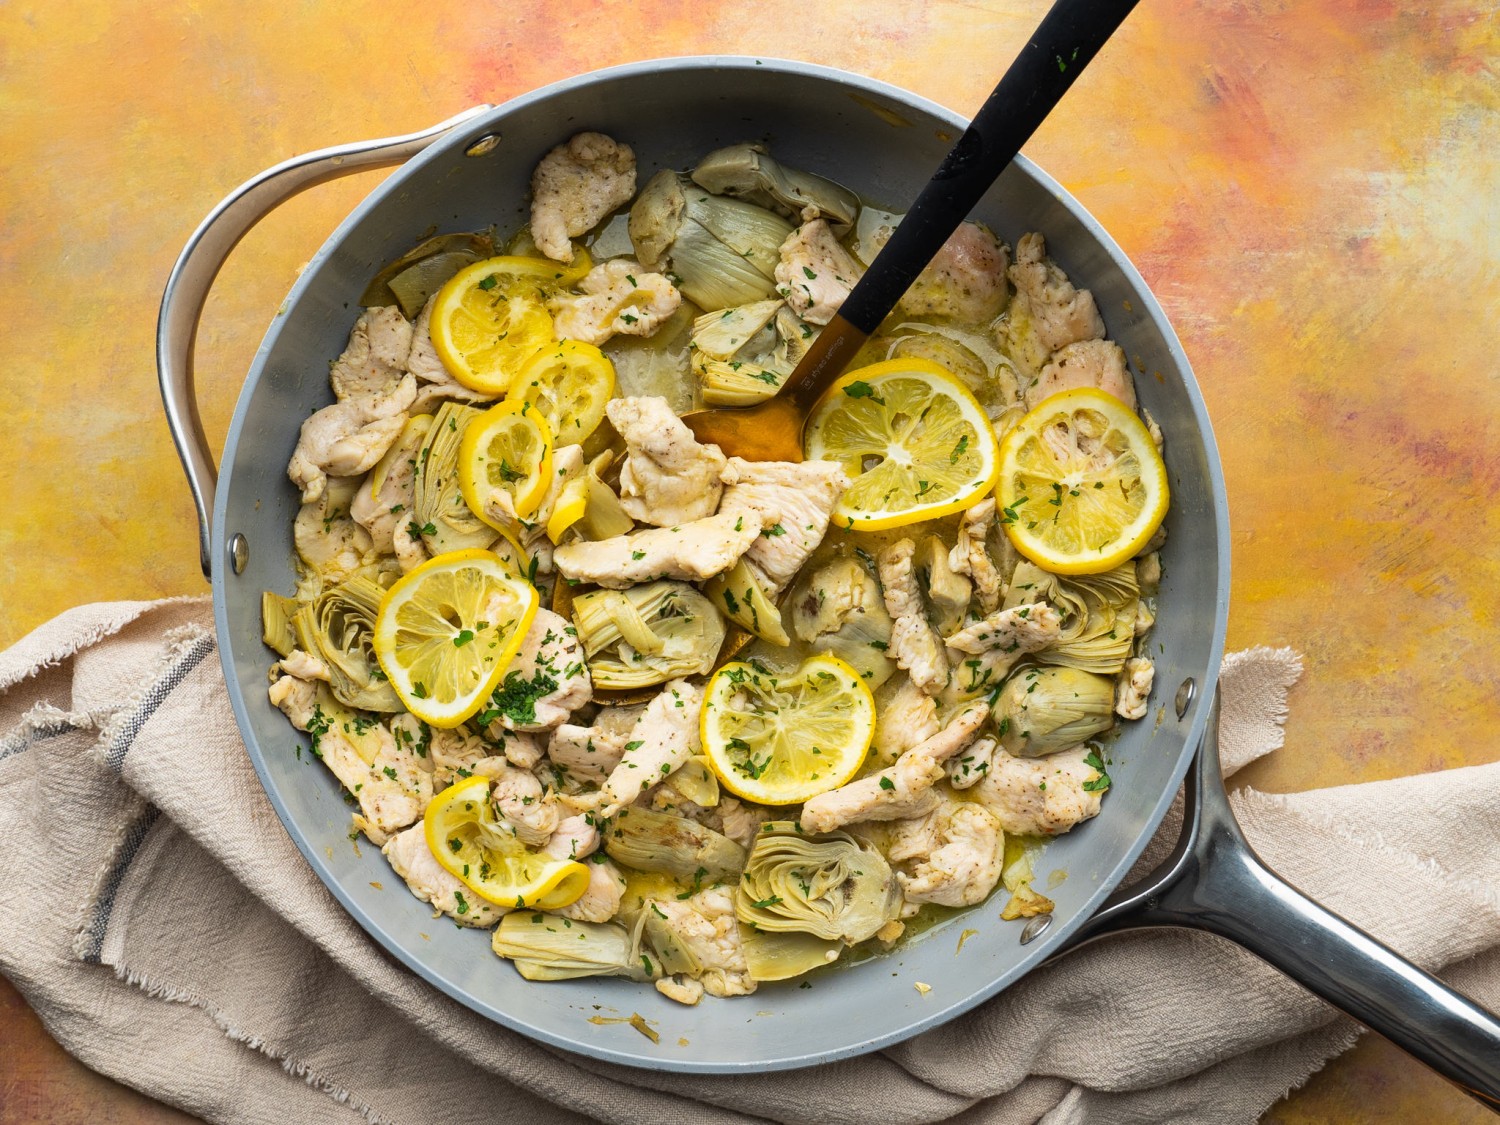 Chicken with artichokes and lemon in a pan with a serving spoon